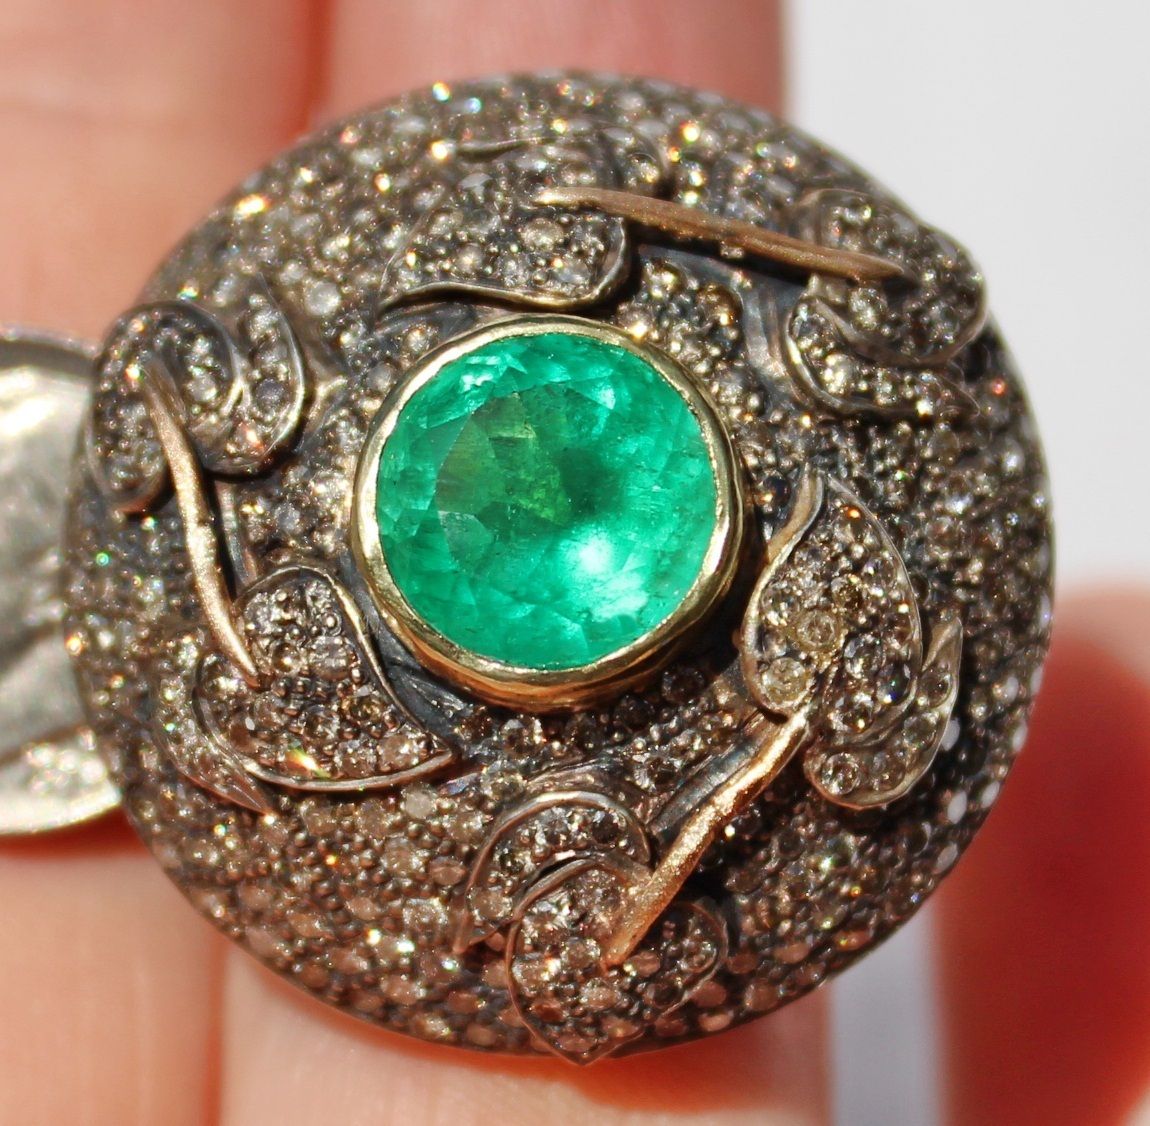 LARGE ANTIQUE 14K EMERALD PAVE DIAMOND DOME RING LOADED WITH DIAMONDS